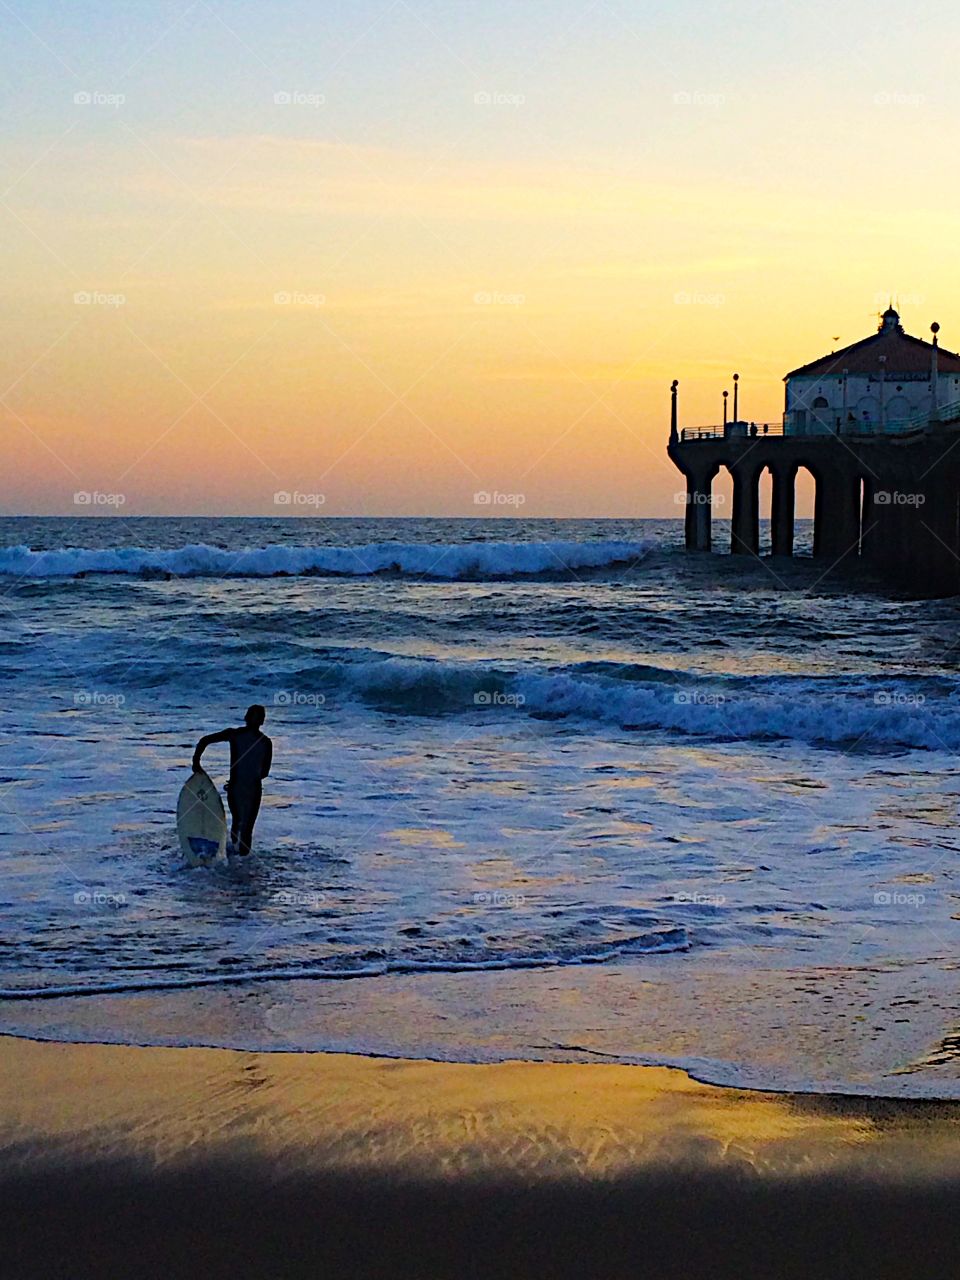 Surfer pauses before heading in at Manhattan Beach, CA.